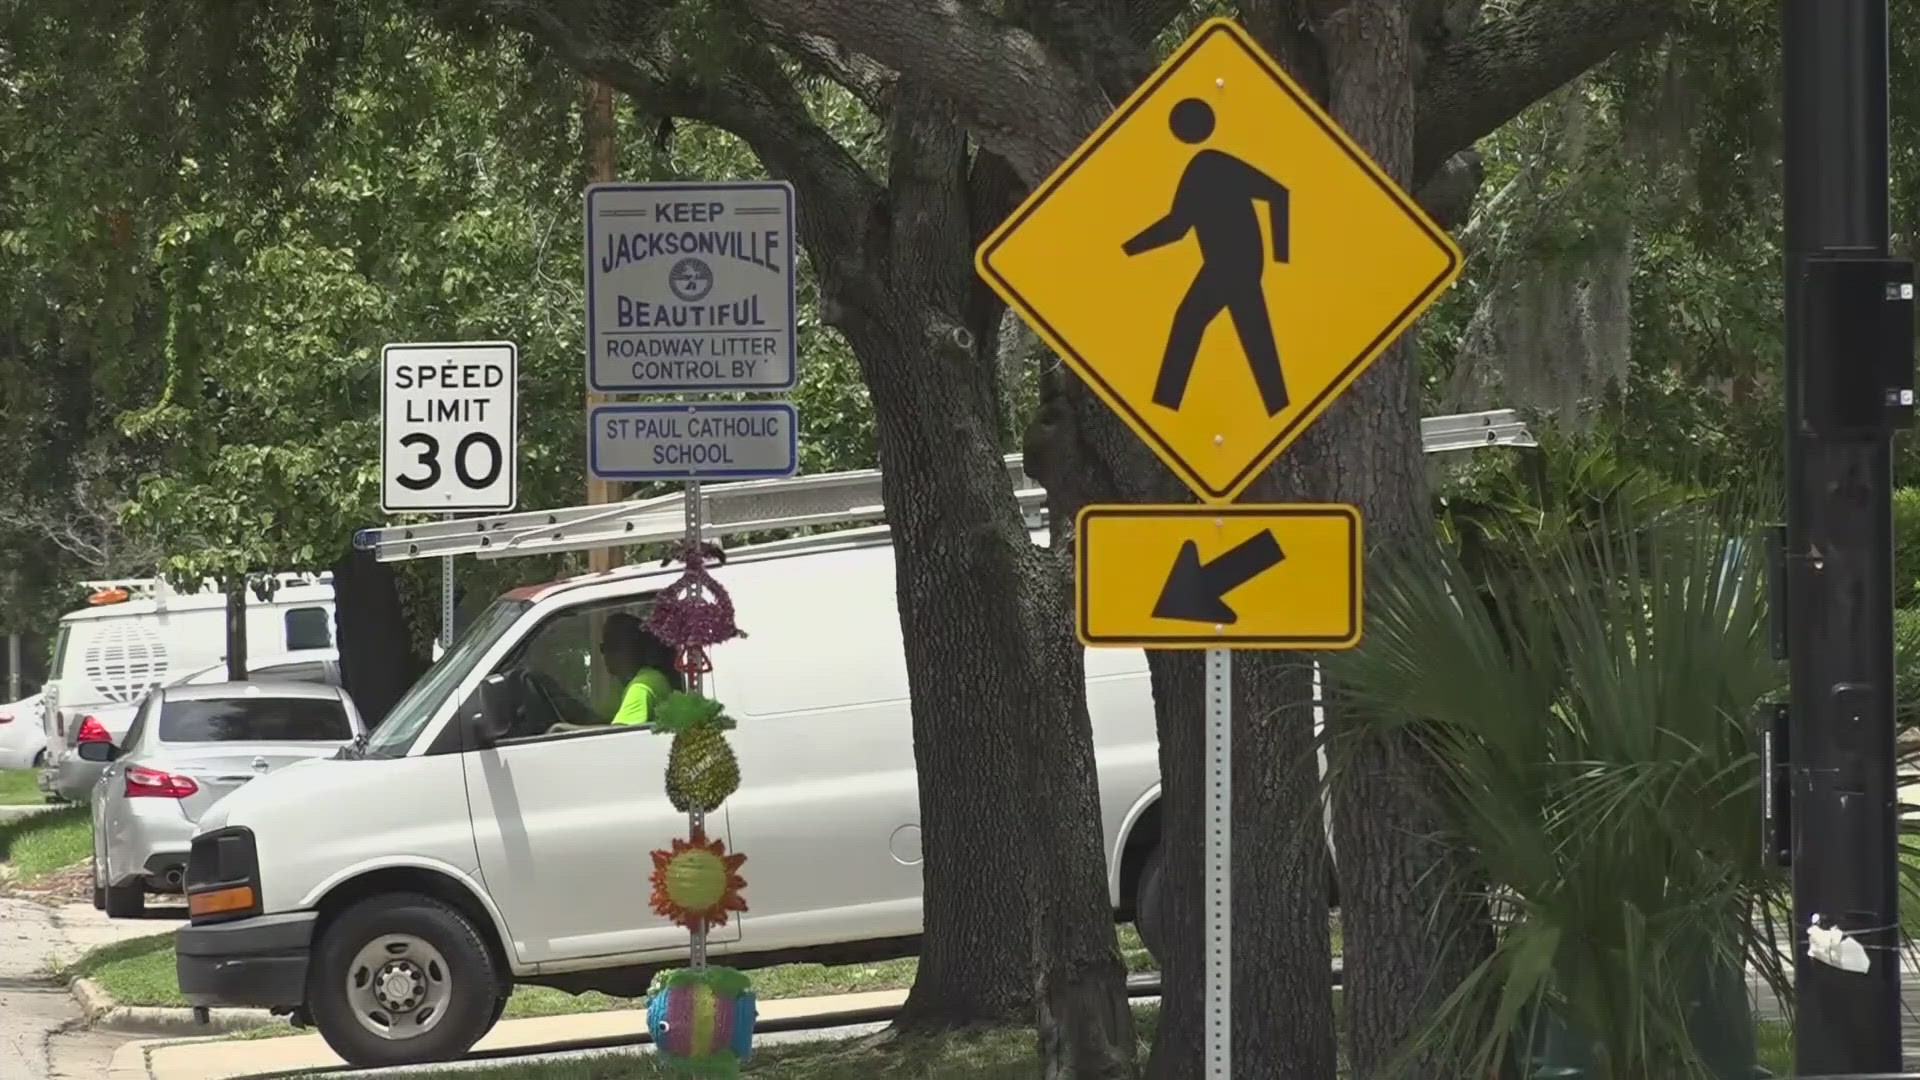 On Wednesday, a bicyclist was killed on Emerson Street in Jacksonville after the man was struck by a car in which marked the alarming statistic.